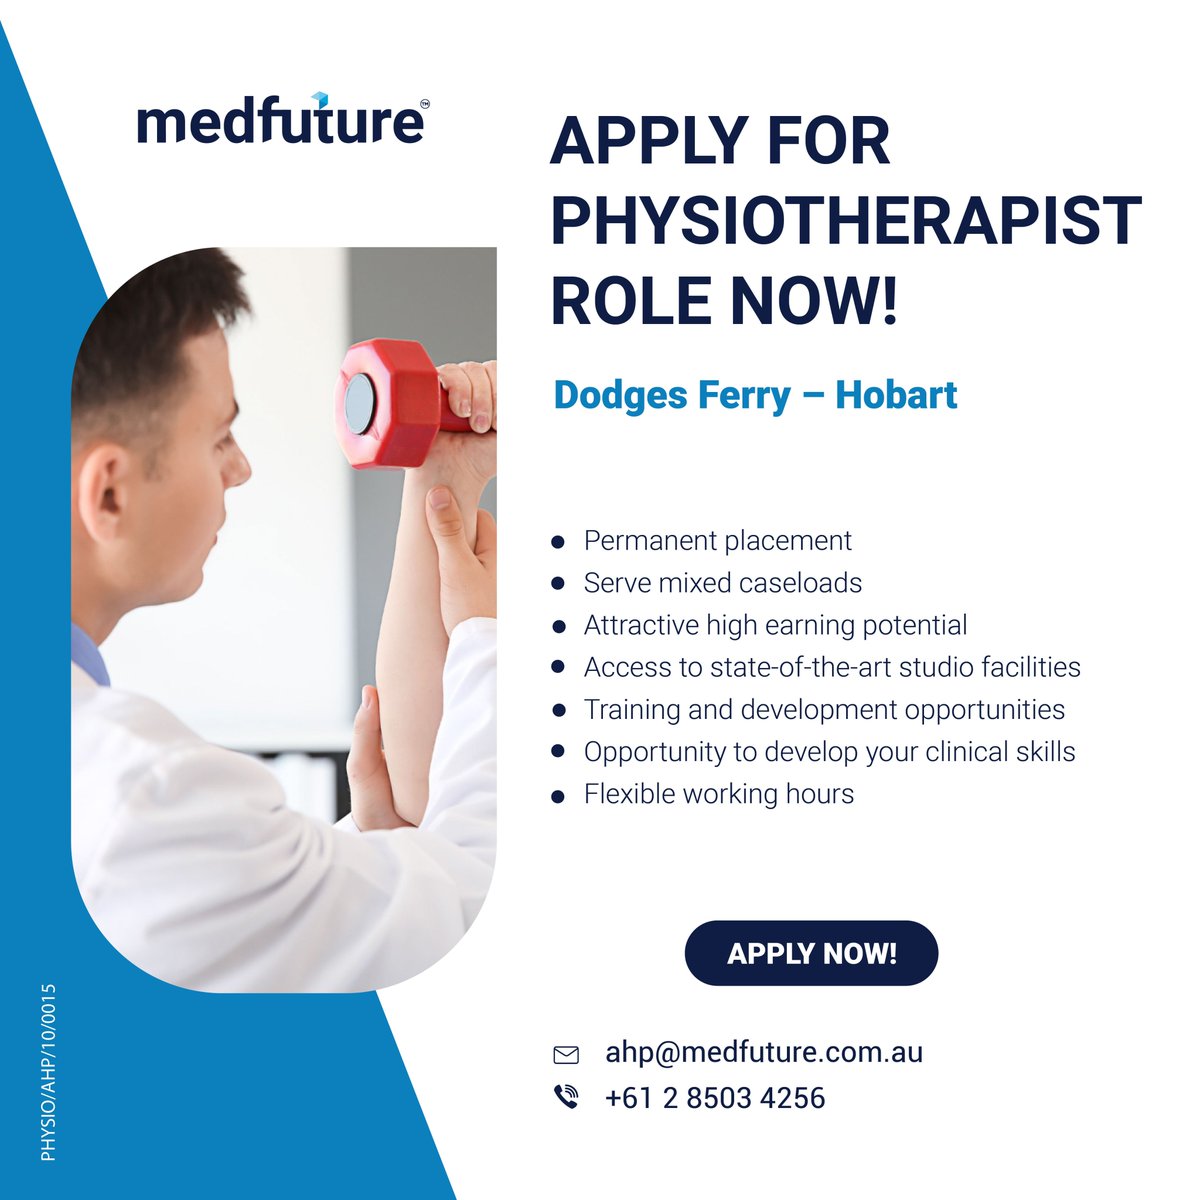 #Physiotherapist vacancies are available in #Hobart. Discover the latest medical and healthcare professional job vacancies found in Australia & New Zealand when you subscribe with #Medfuture.

Apply Link - medfuture.com.au/job/permanent

#PhysioJobs #HobartJobs #MedcareJobs